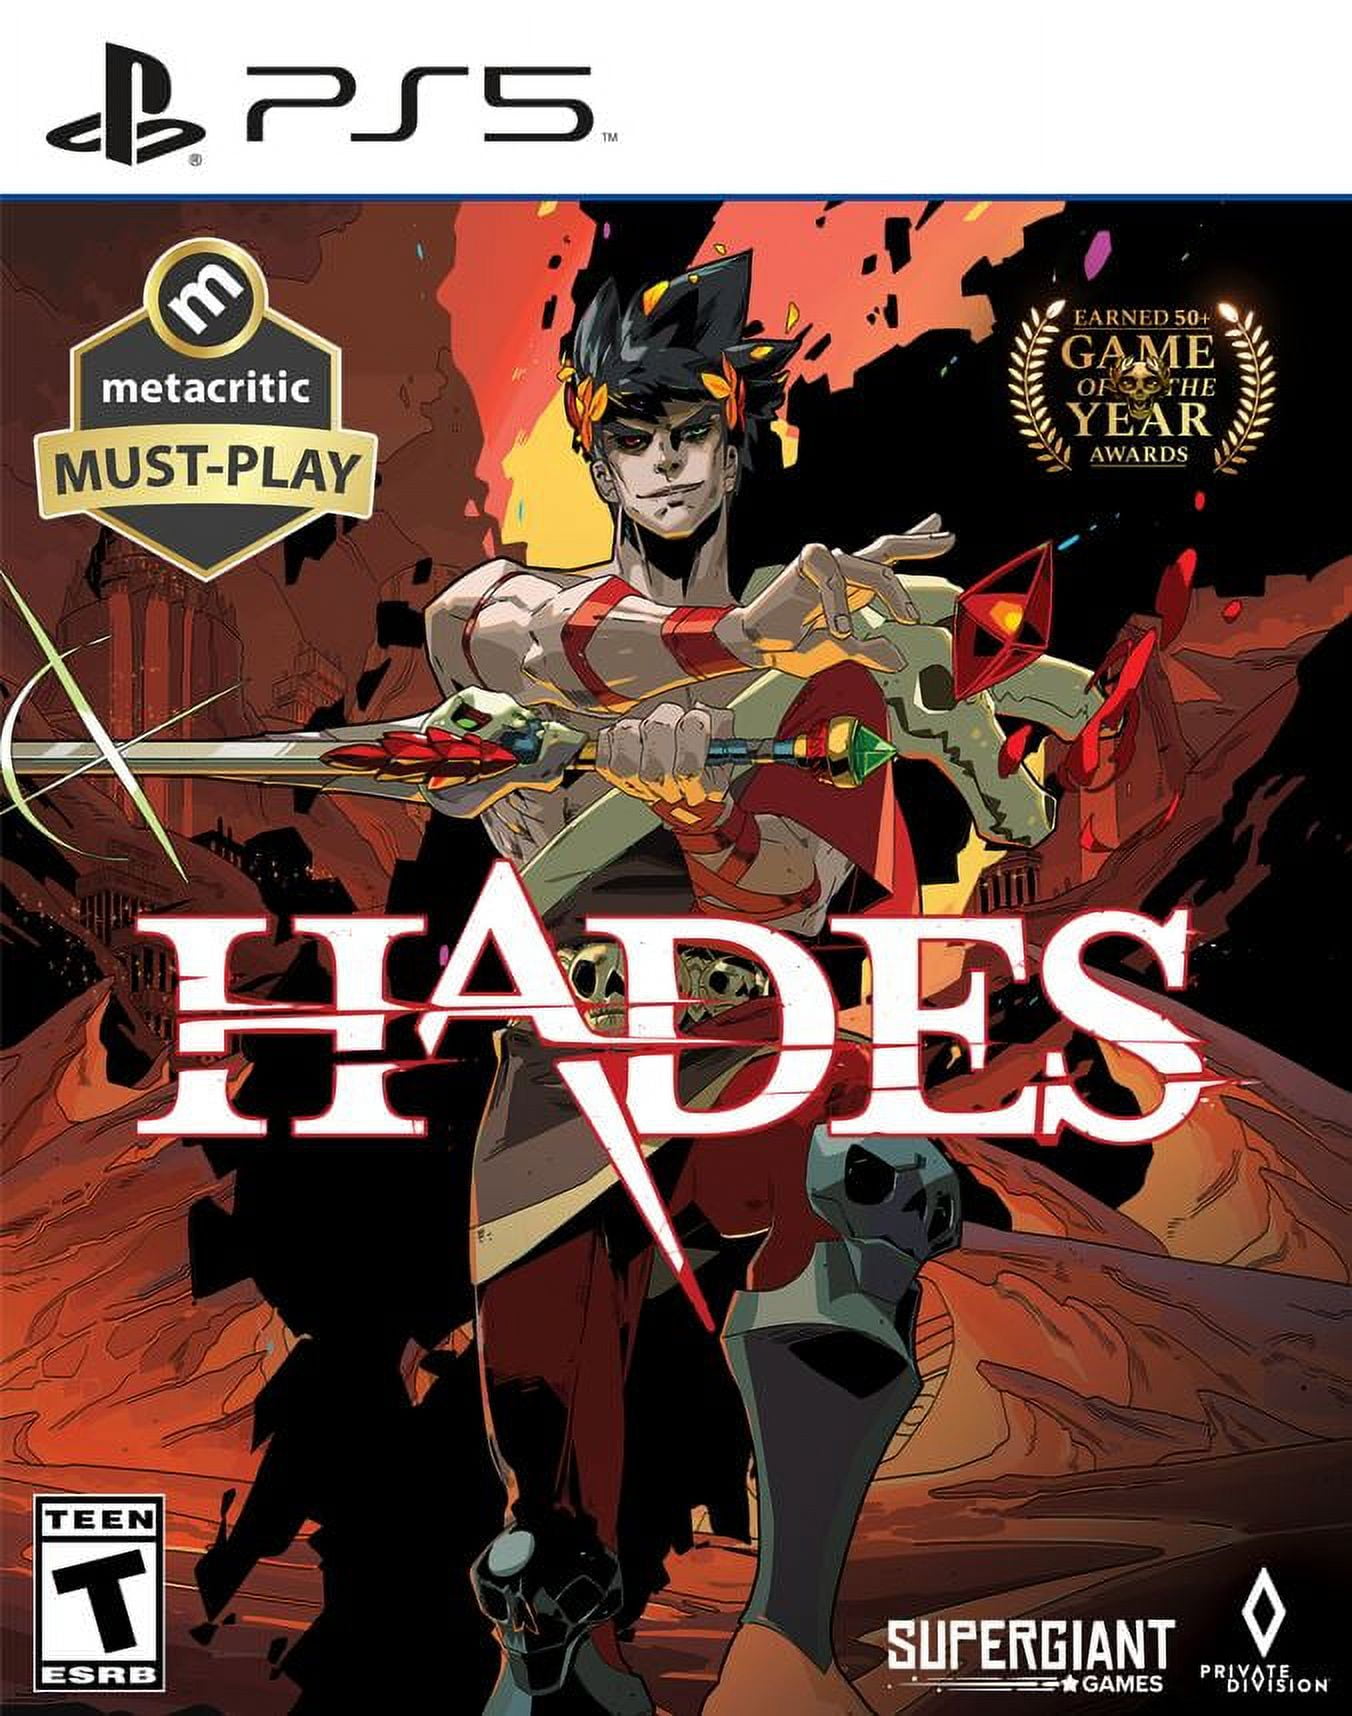  Hades Limited Edition (Nintendo Switch) : Video Games